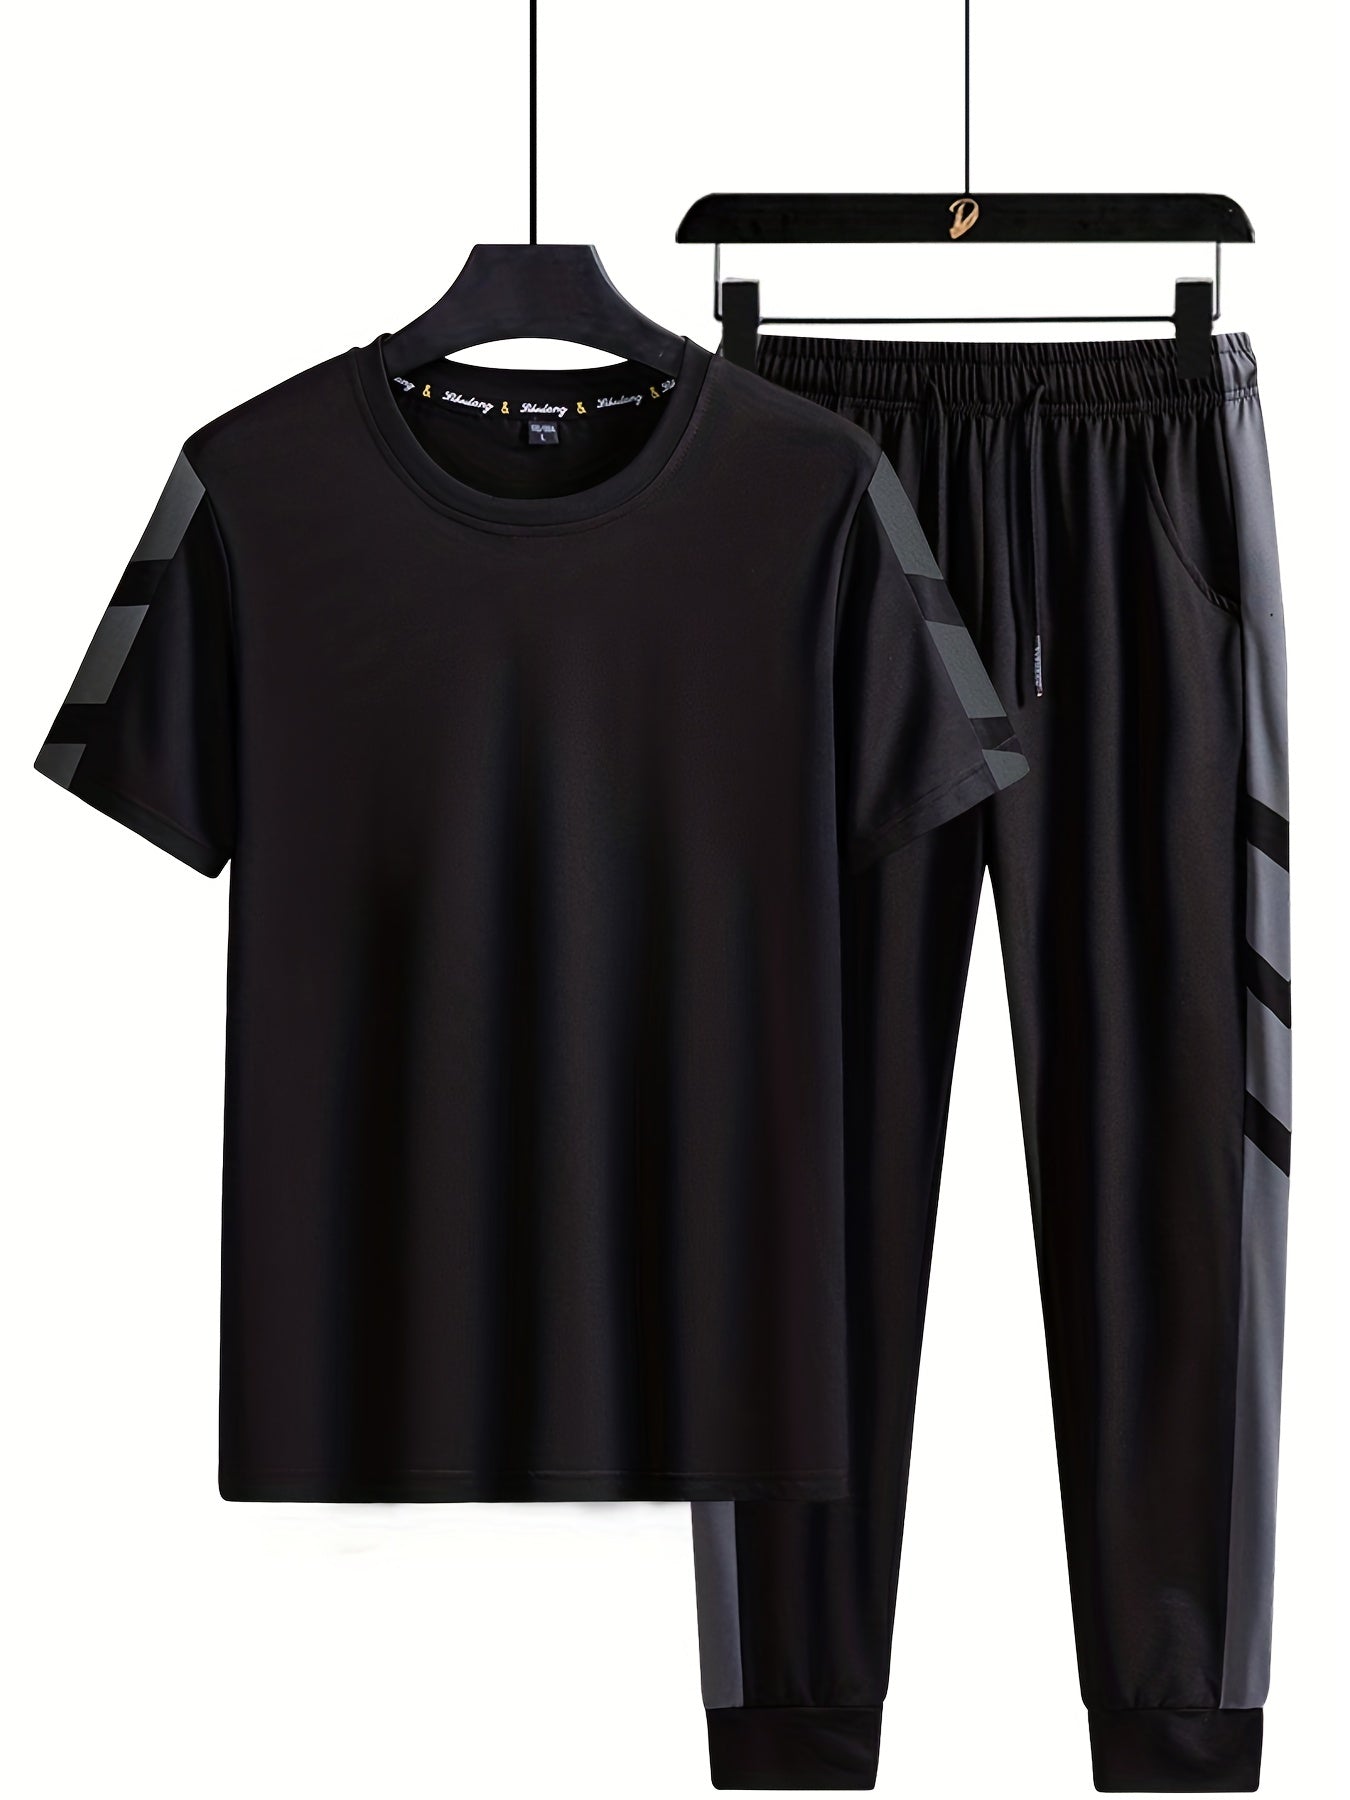 Classic Men's 2 Pieces Outfits, Short Sleeve T-Shirt And Drawstring Trousers Set